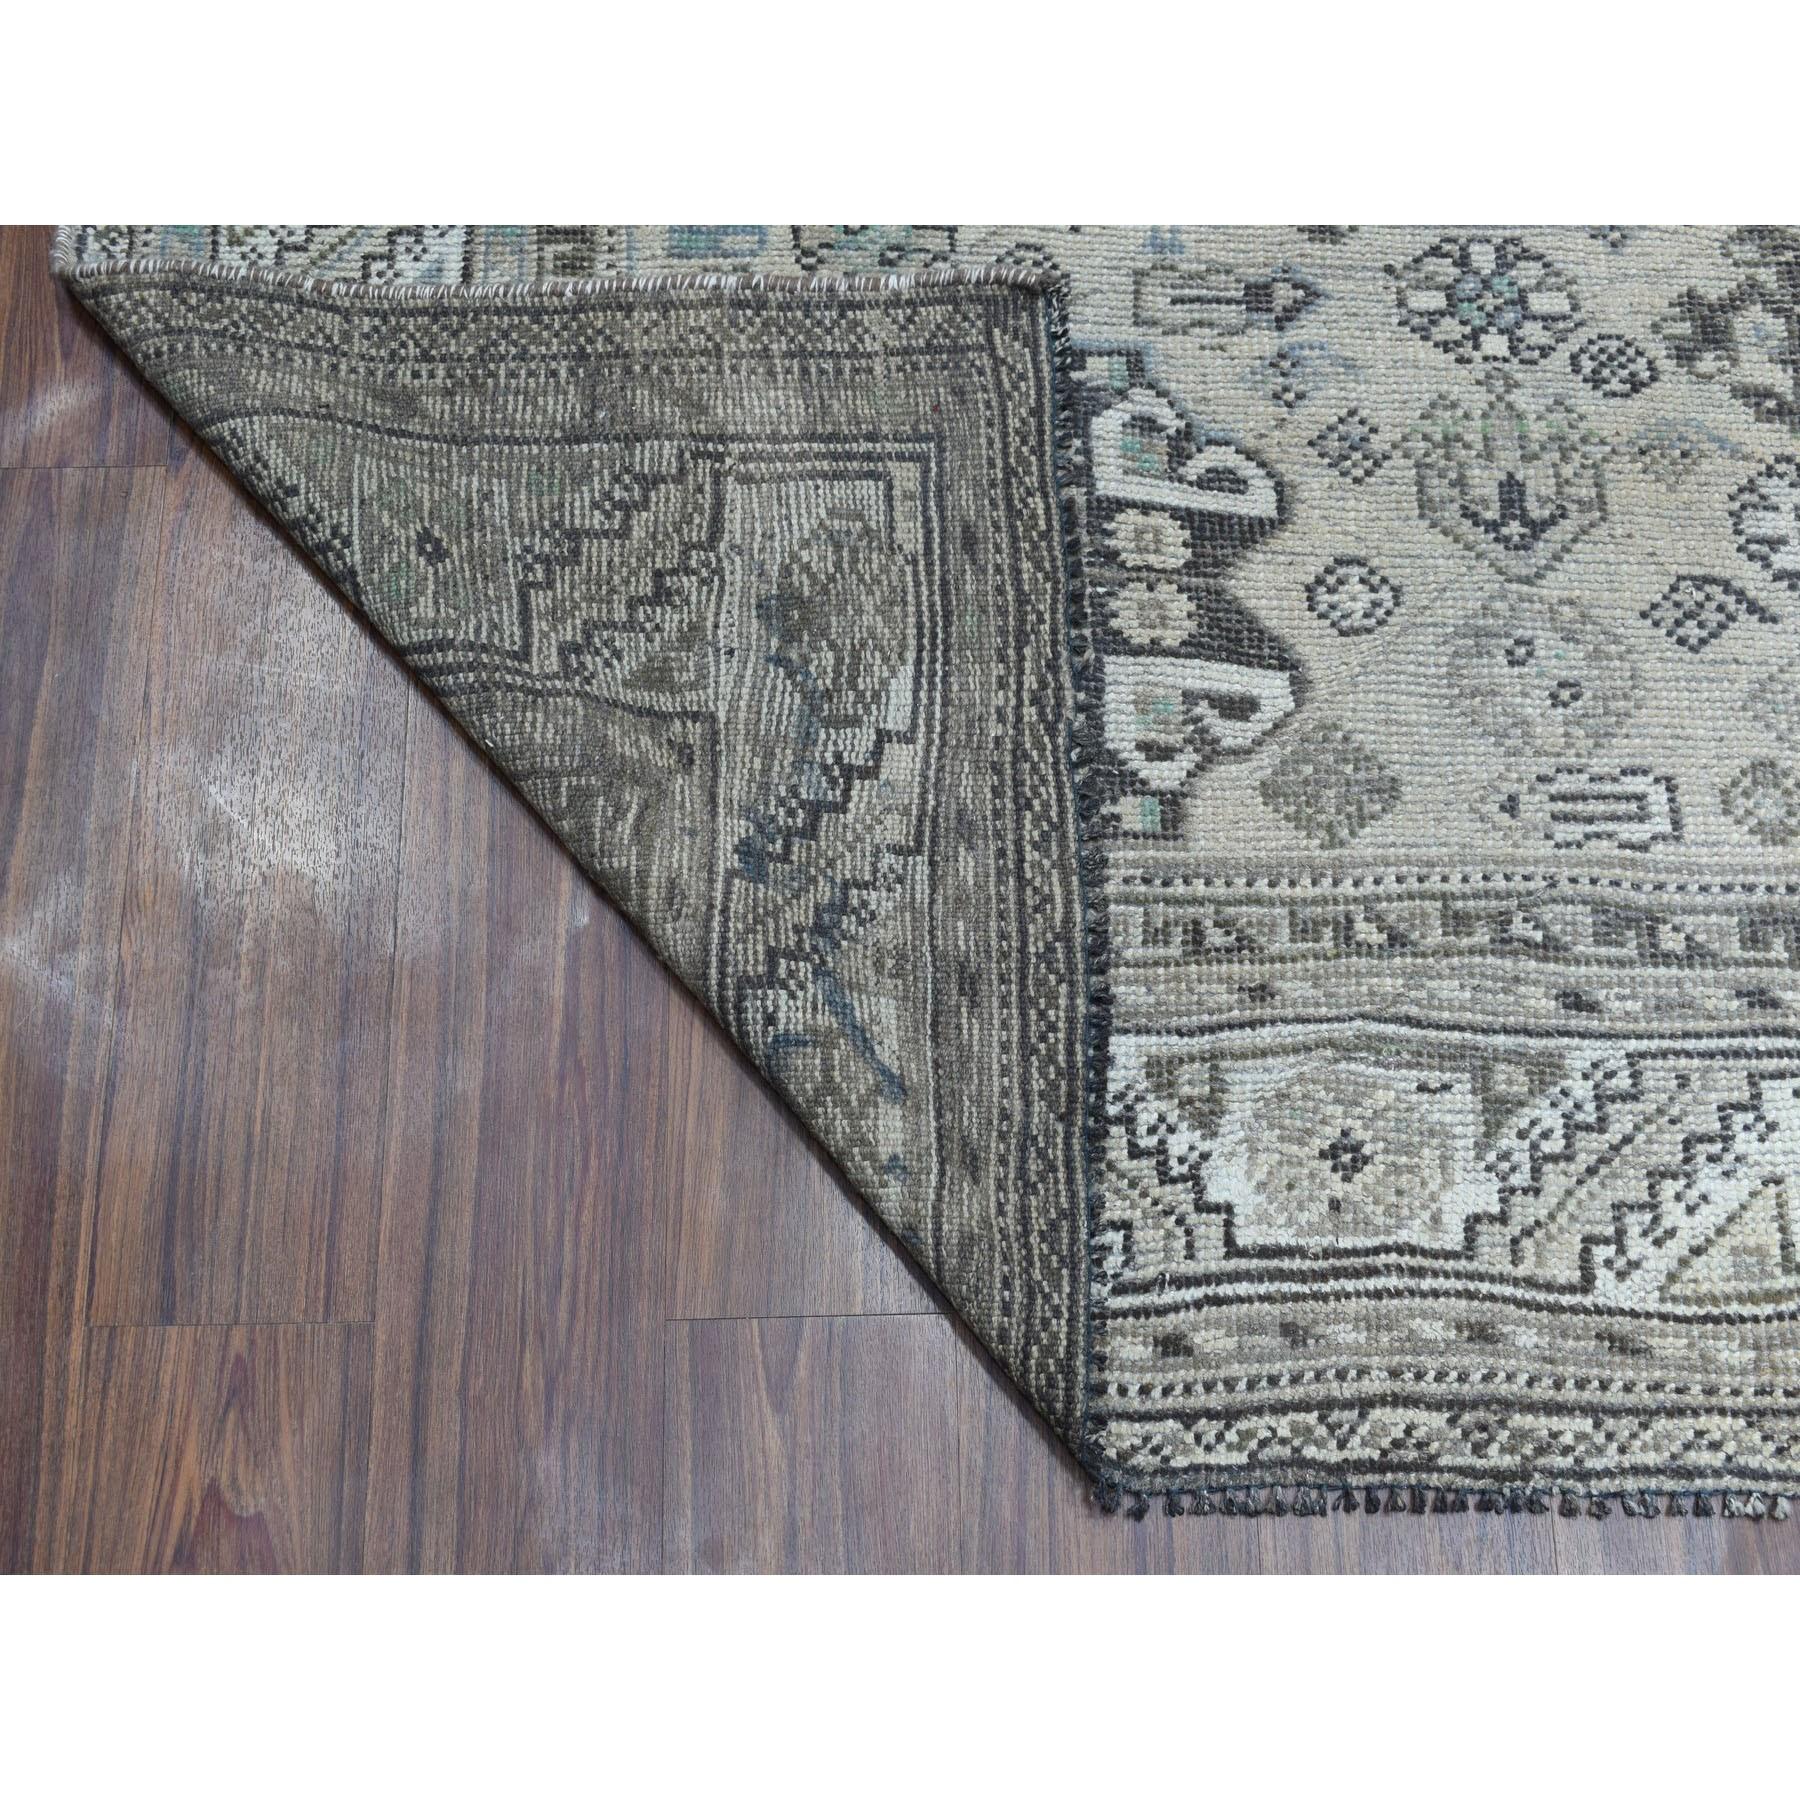 Medieval Vintage Worn Down Distressed Colors Persian Qashqai Hand Knotted Bohemian Rug For Sale